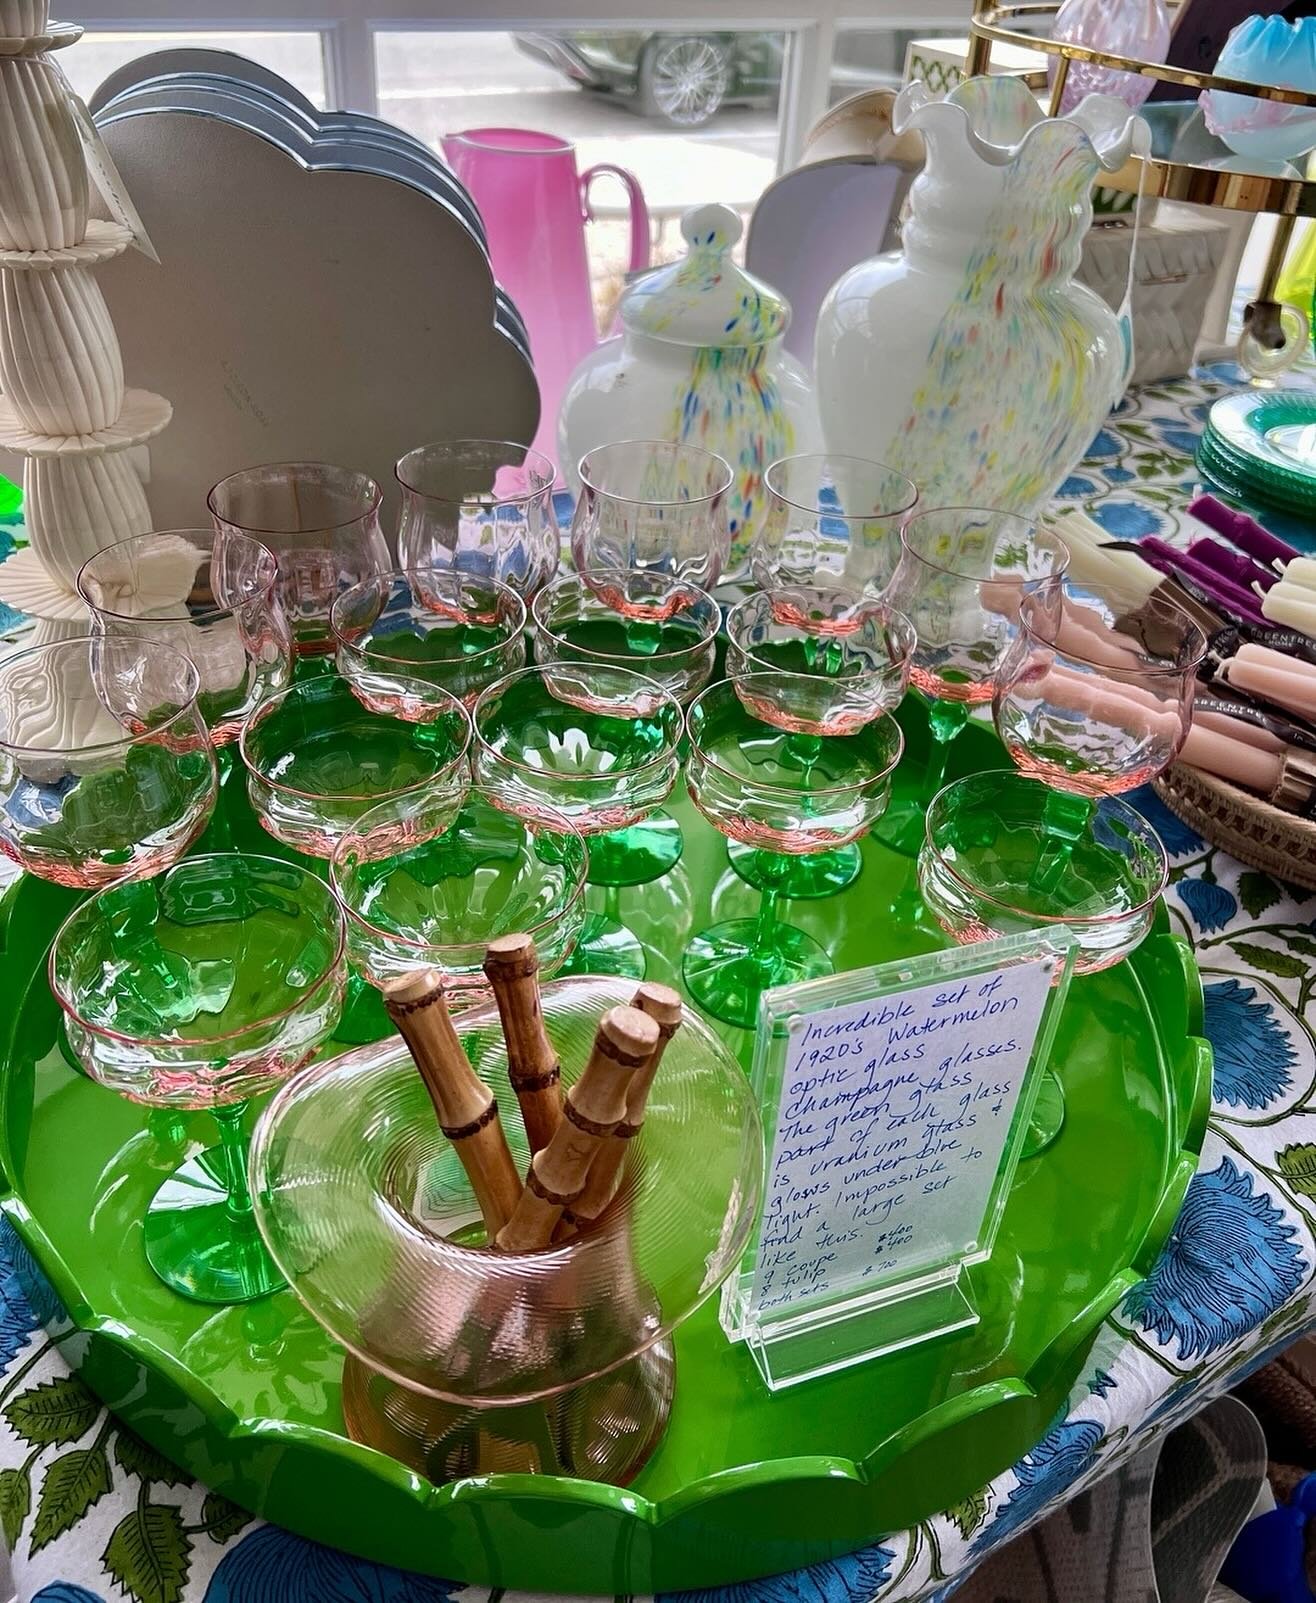 Mom loves champagne! Bring her mimosas in bed with these vintage watermelon and tulip glass coupe styles. 
⠀⠀⠀⠀⠀⠀⠀⠀⠀
#shopmelange #shoposterville #thebartopshop #shopthecape #shopcapecod #shopsmall #shophappy #popupshop #popup #fun #vintagebarware #p